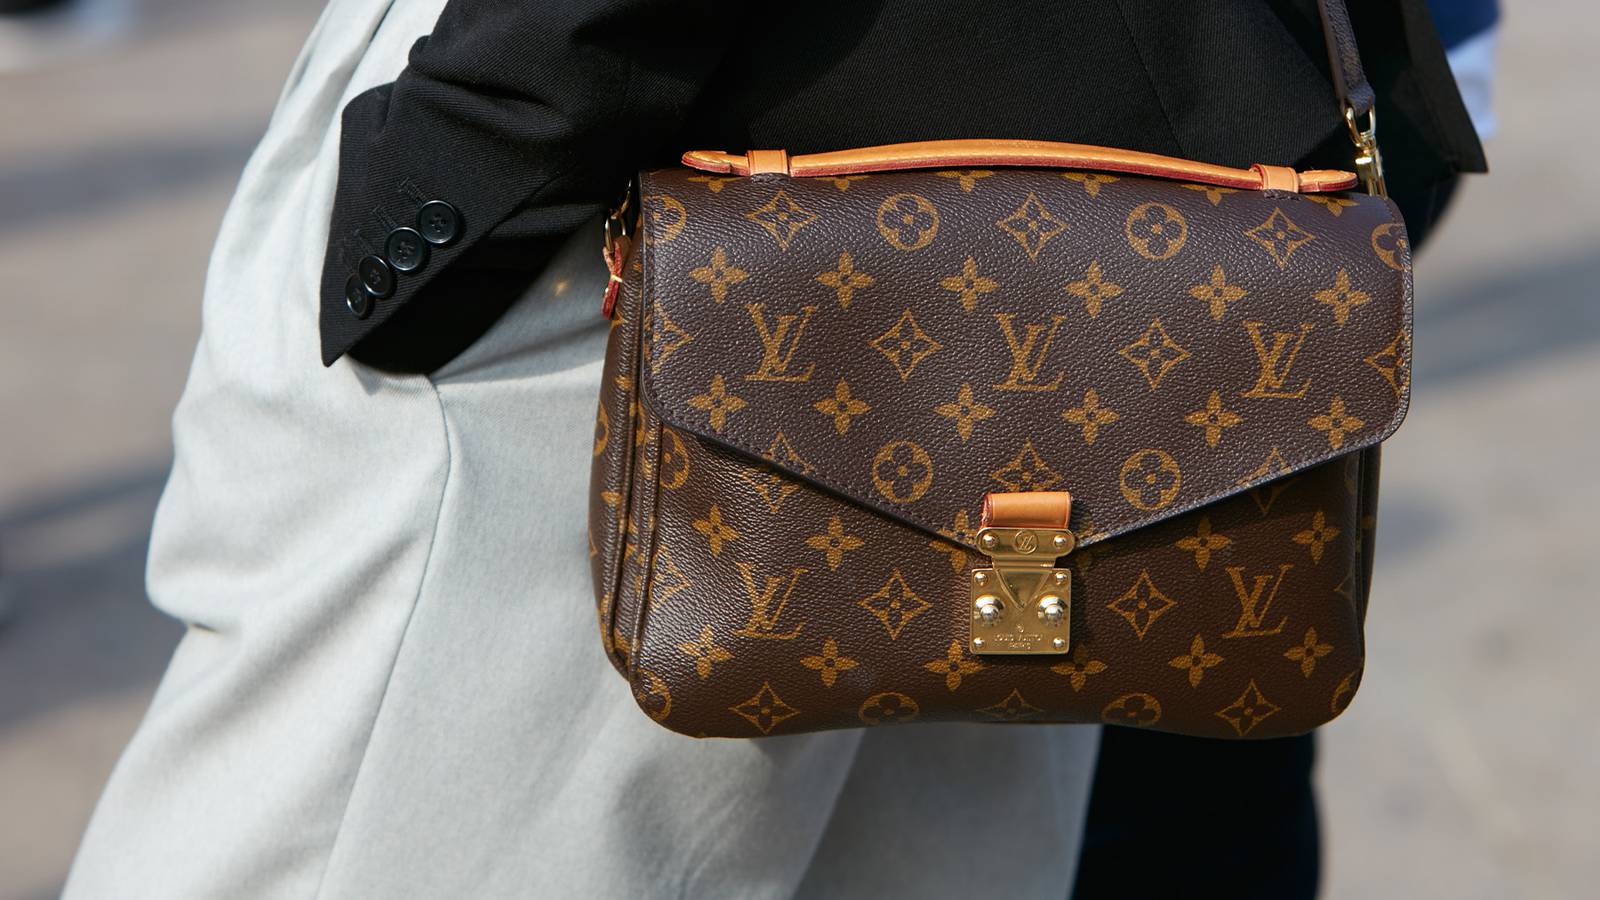 LVMH Hit a Market Valuation of 400 Billion Euros and its ATH. Is It Time to  Buy LVMH?